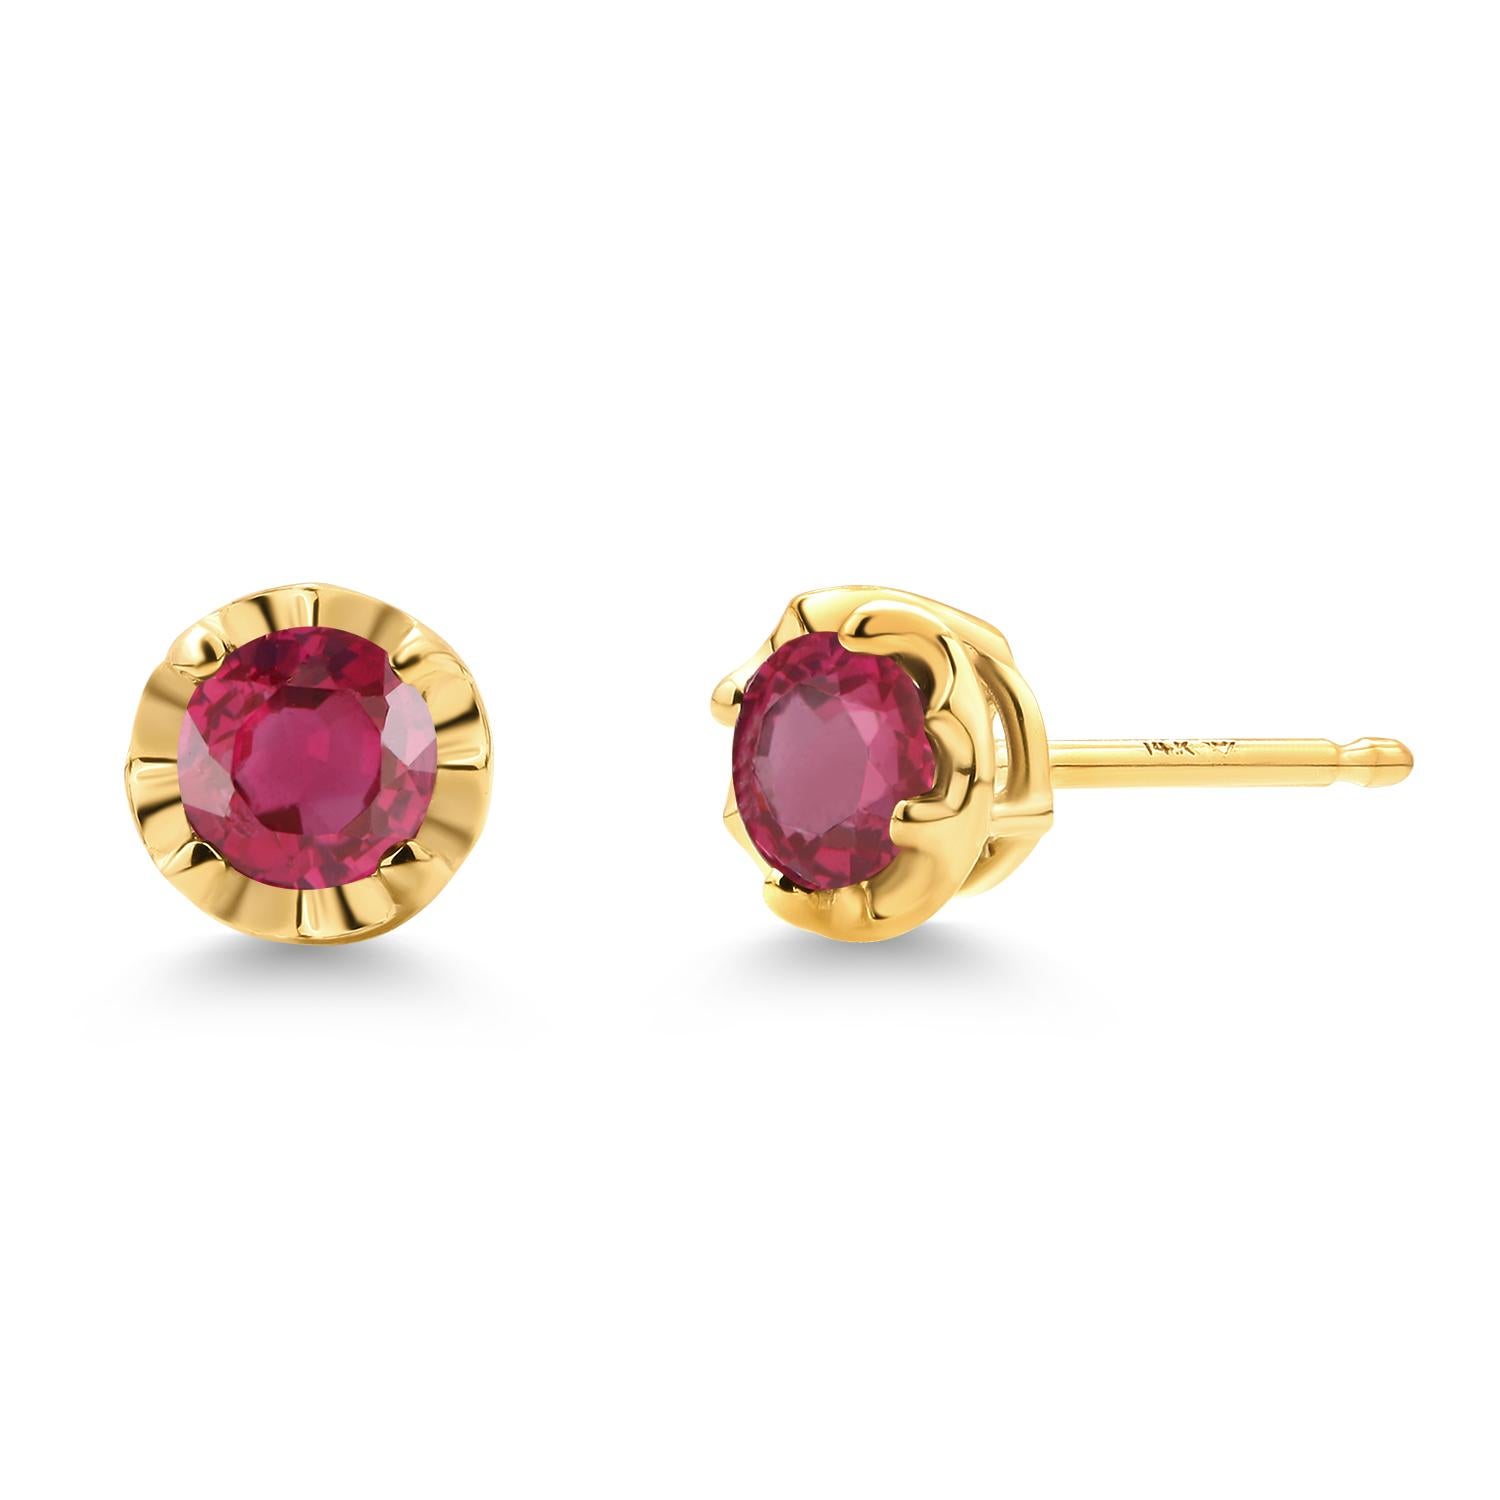 Matched Burma Rubies Weighing 0.60 Carat 0.23 Inch Scalloped Gold Stud Earrings 1